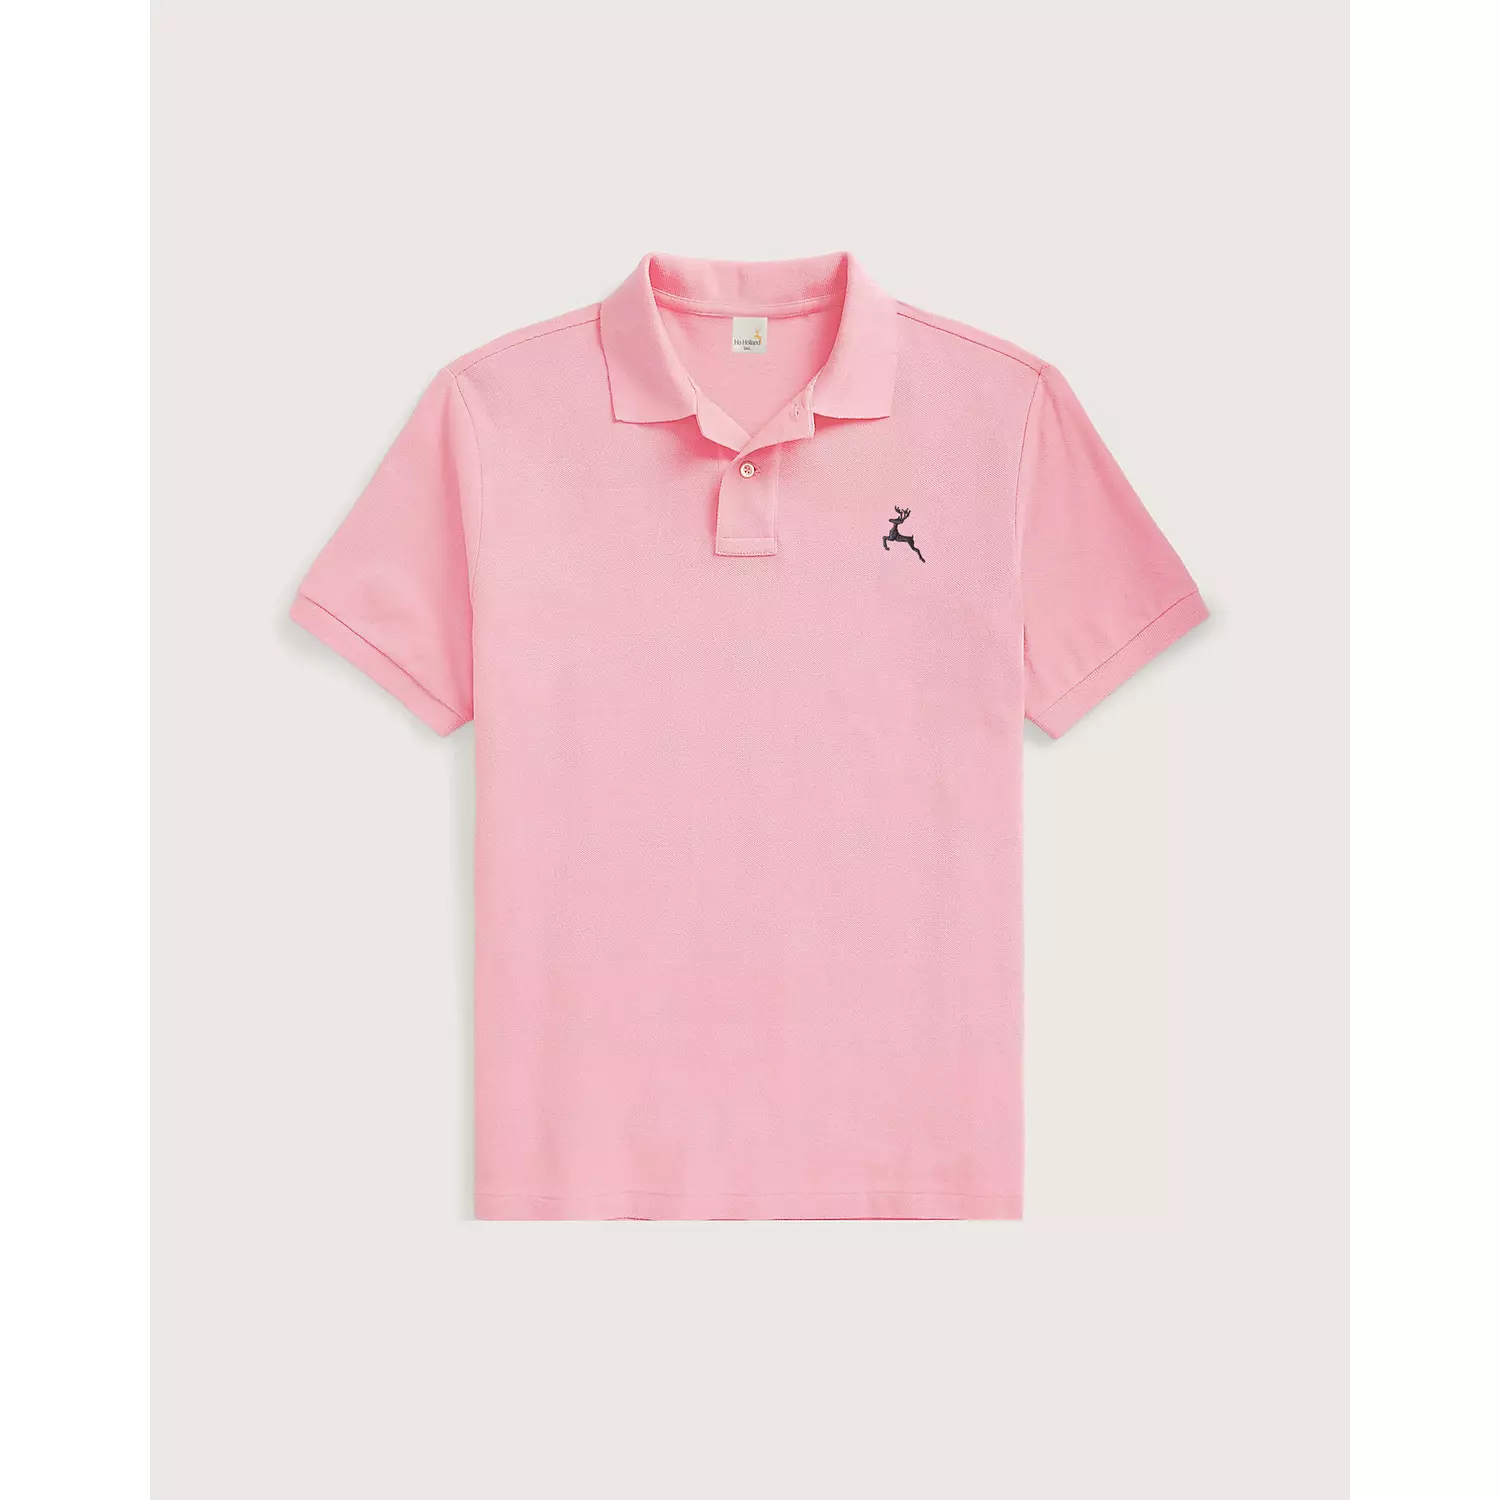 Polo T shirt - Pink 0